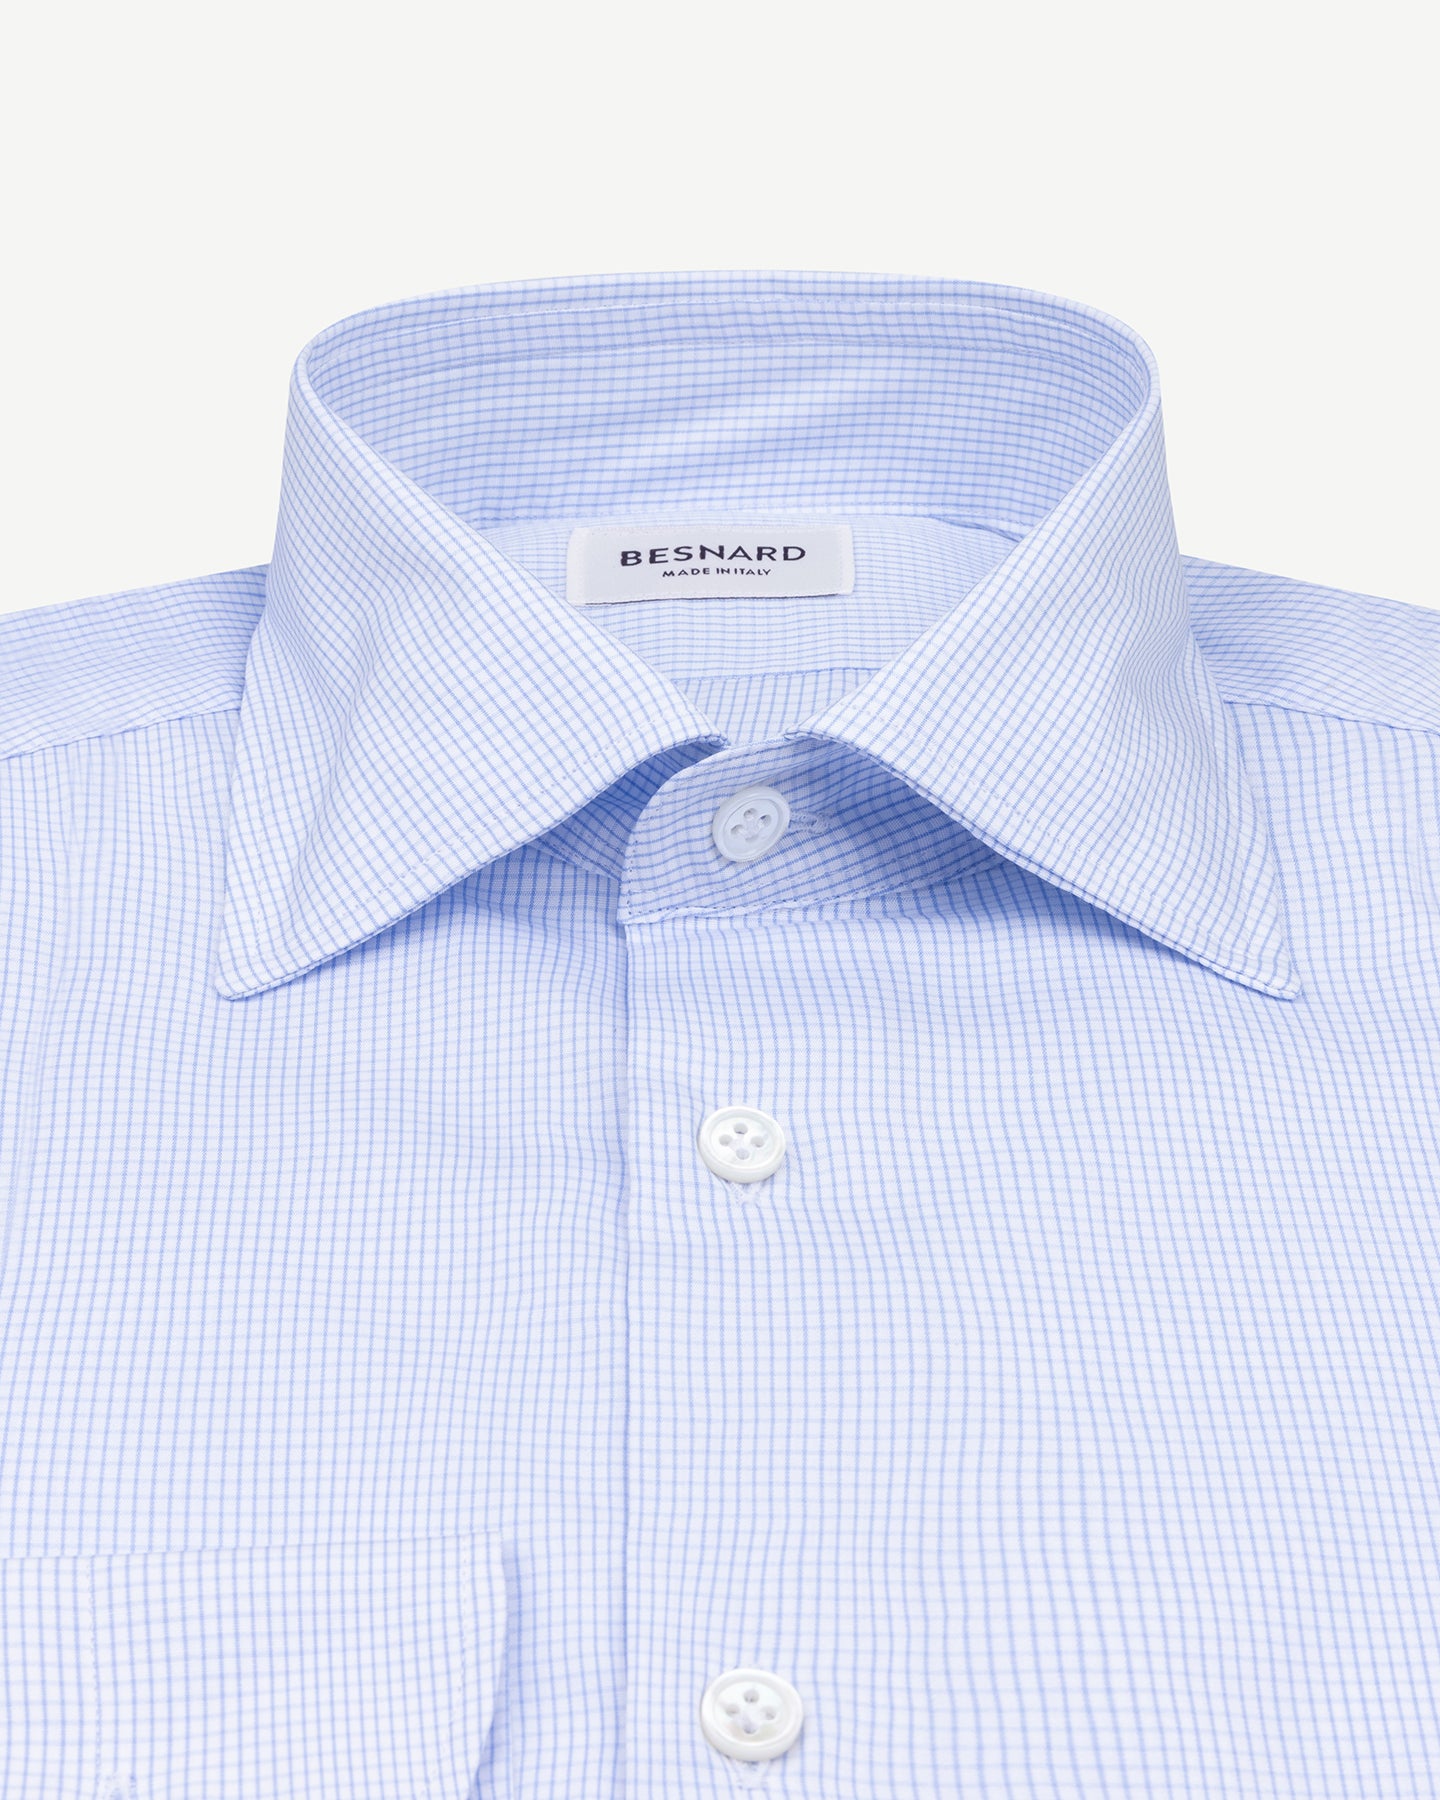 Light blue fine graph check shirt with spread collar